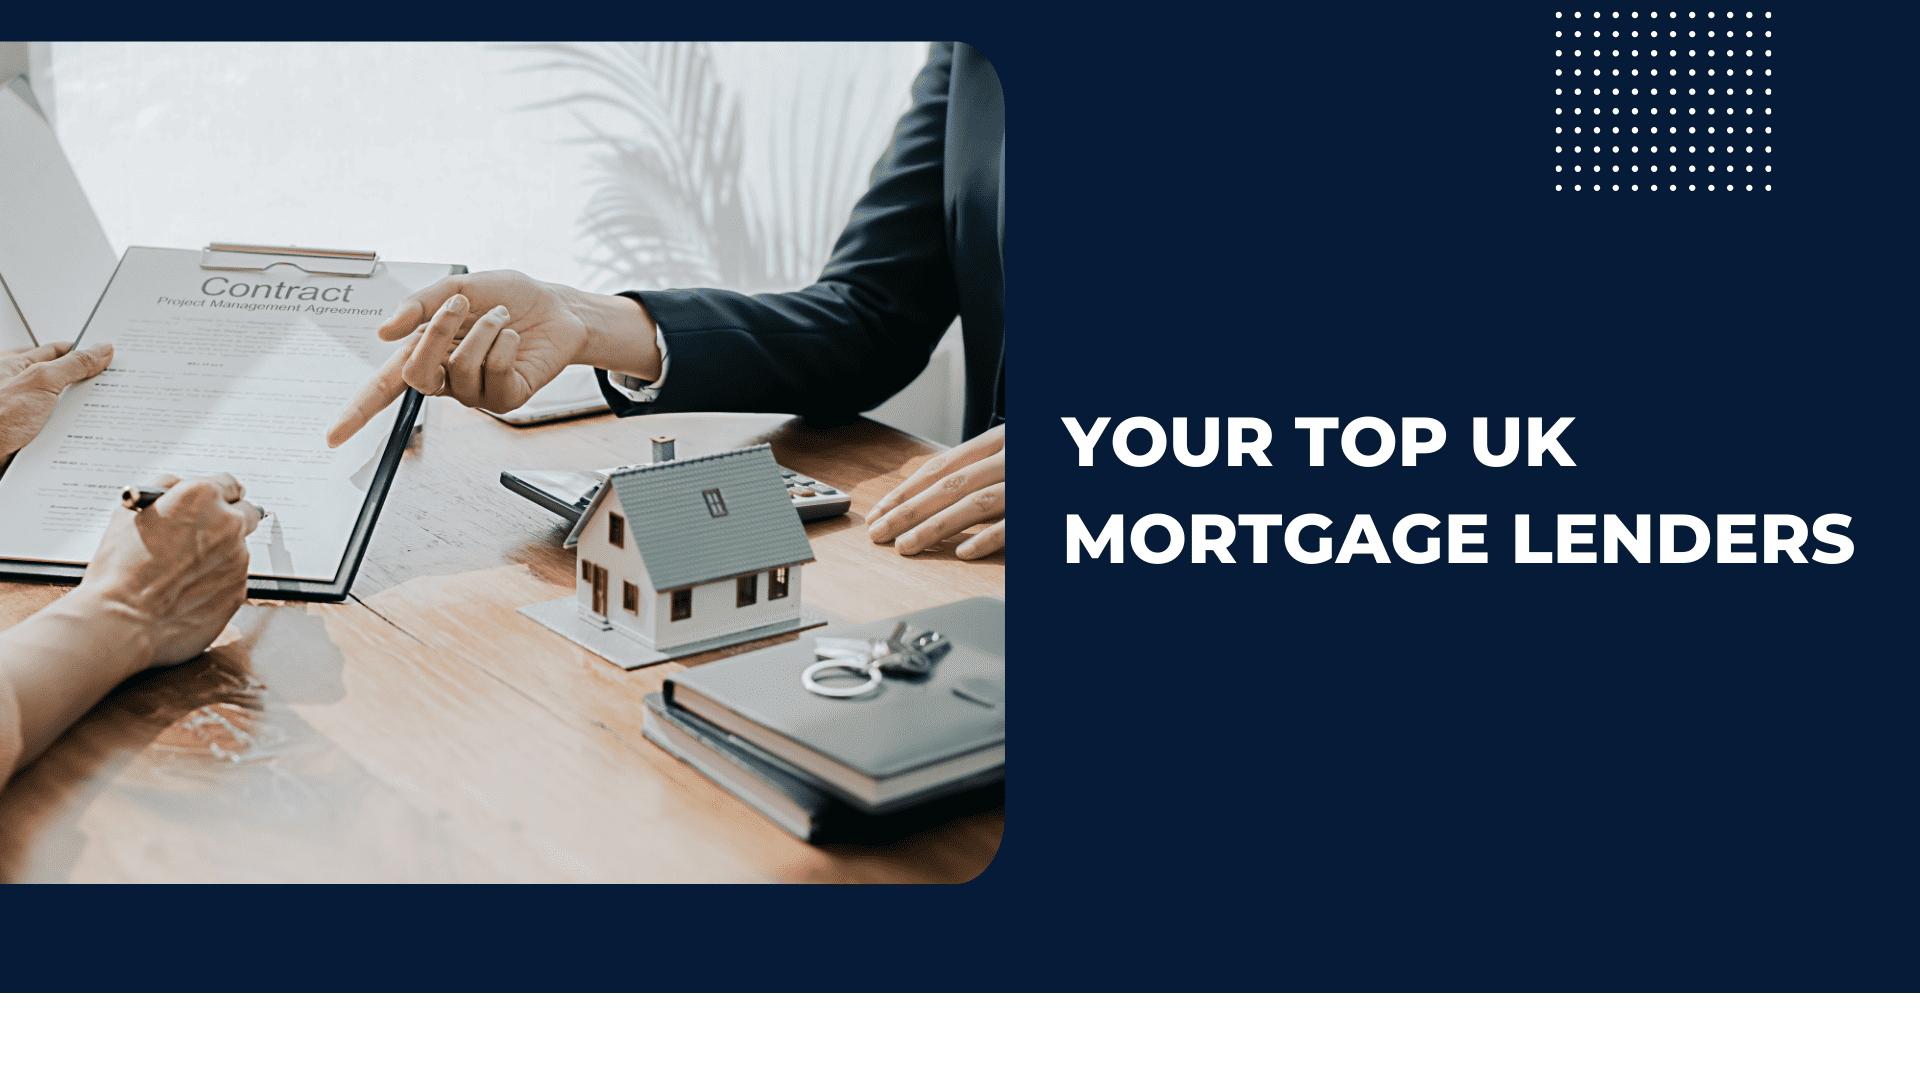 Your Top UK Mortgage Lenders